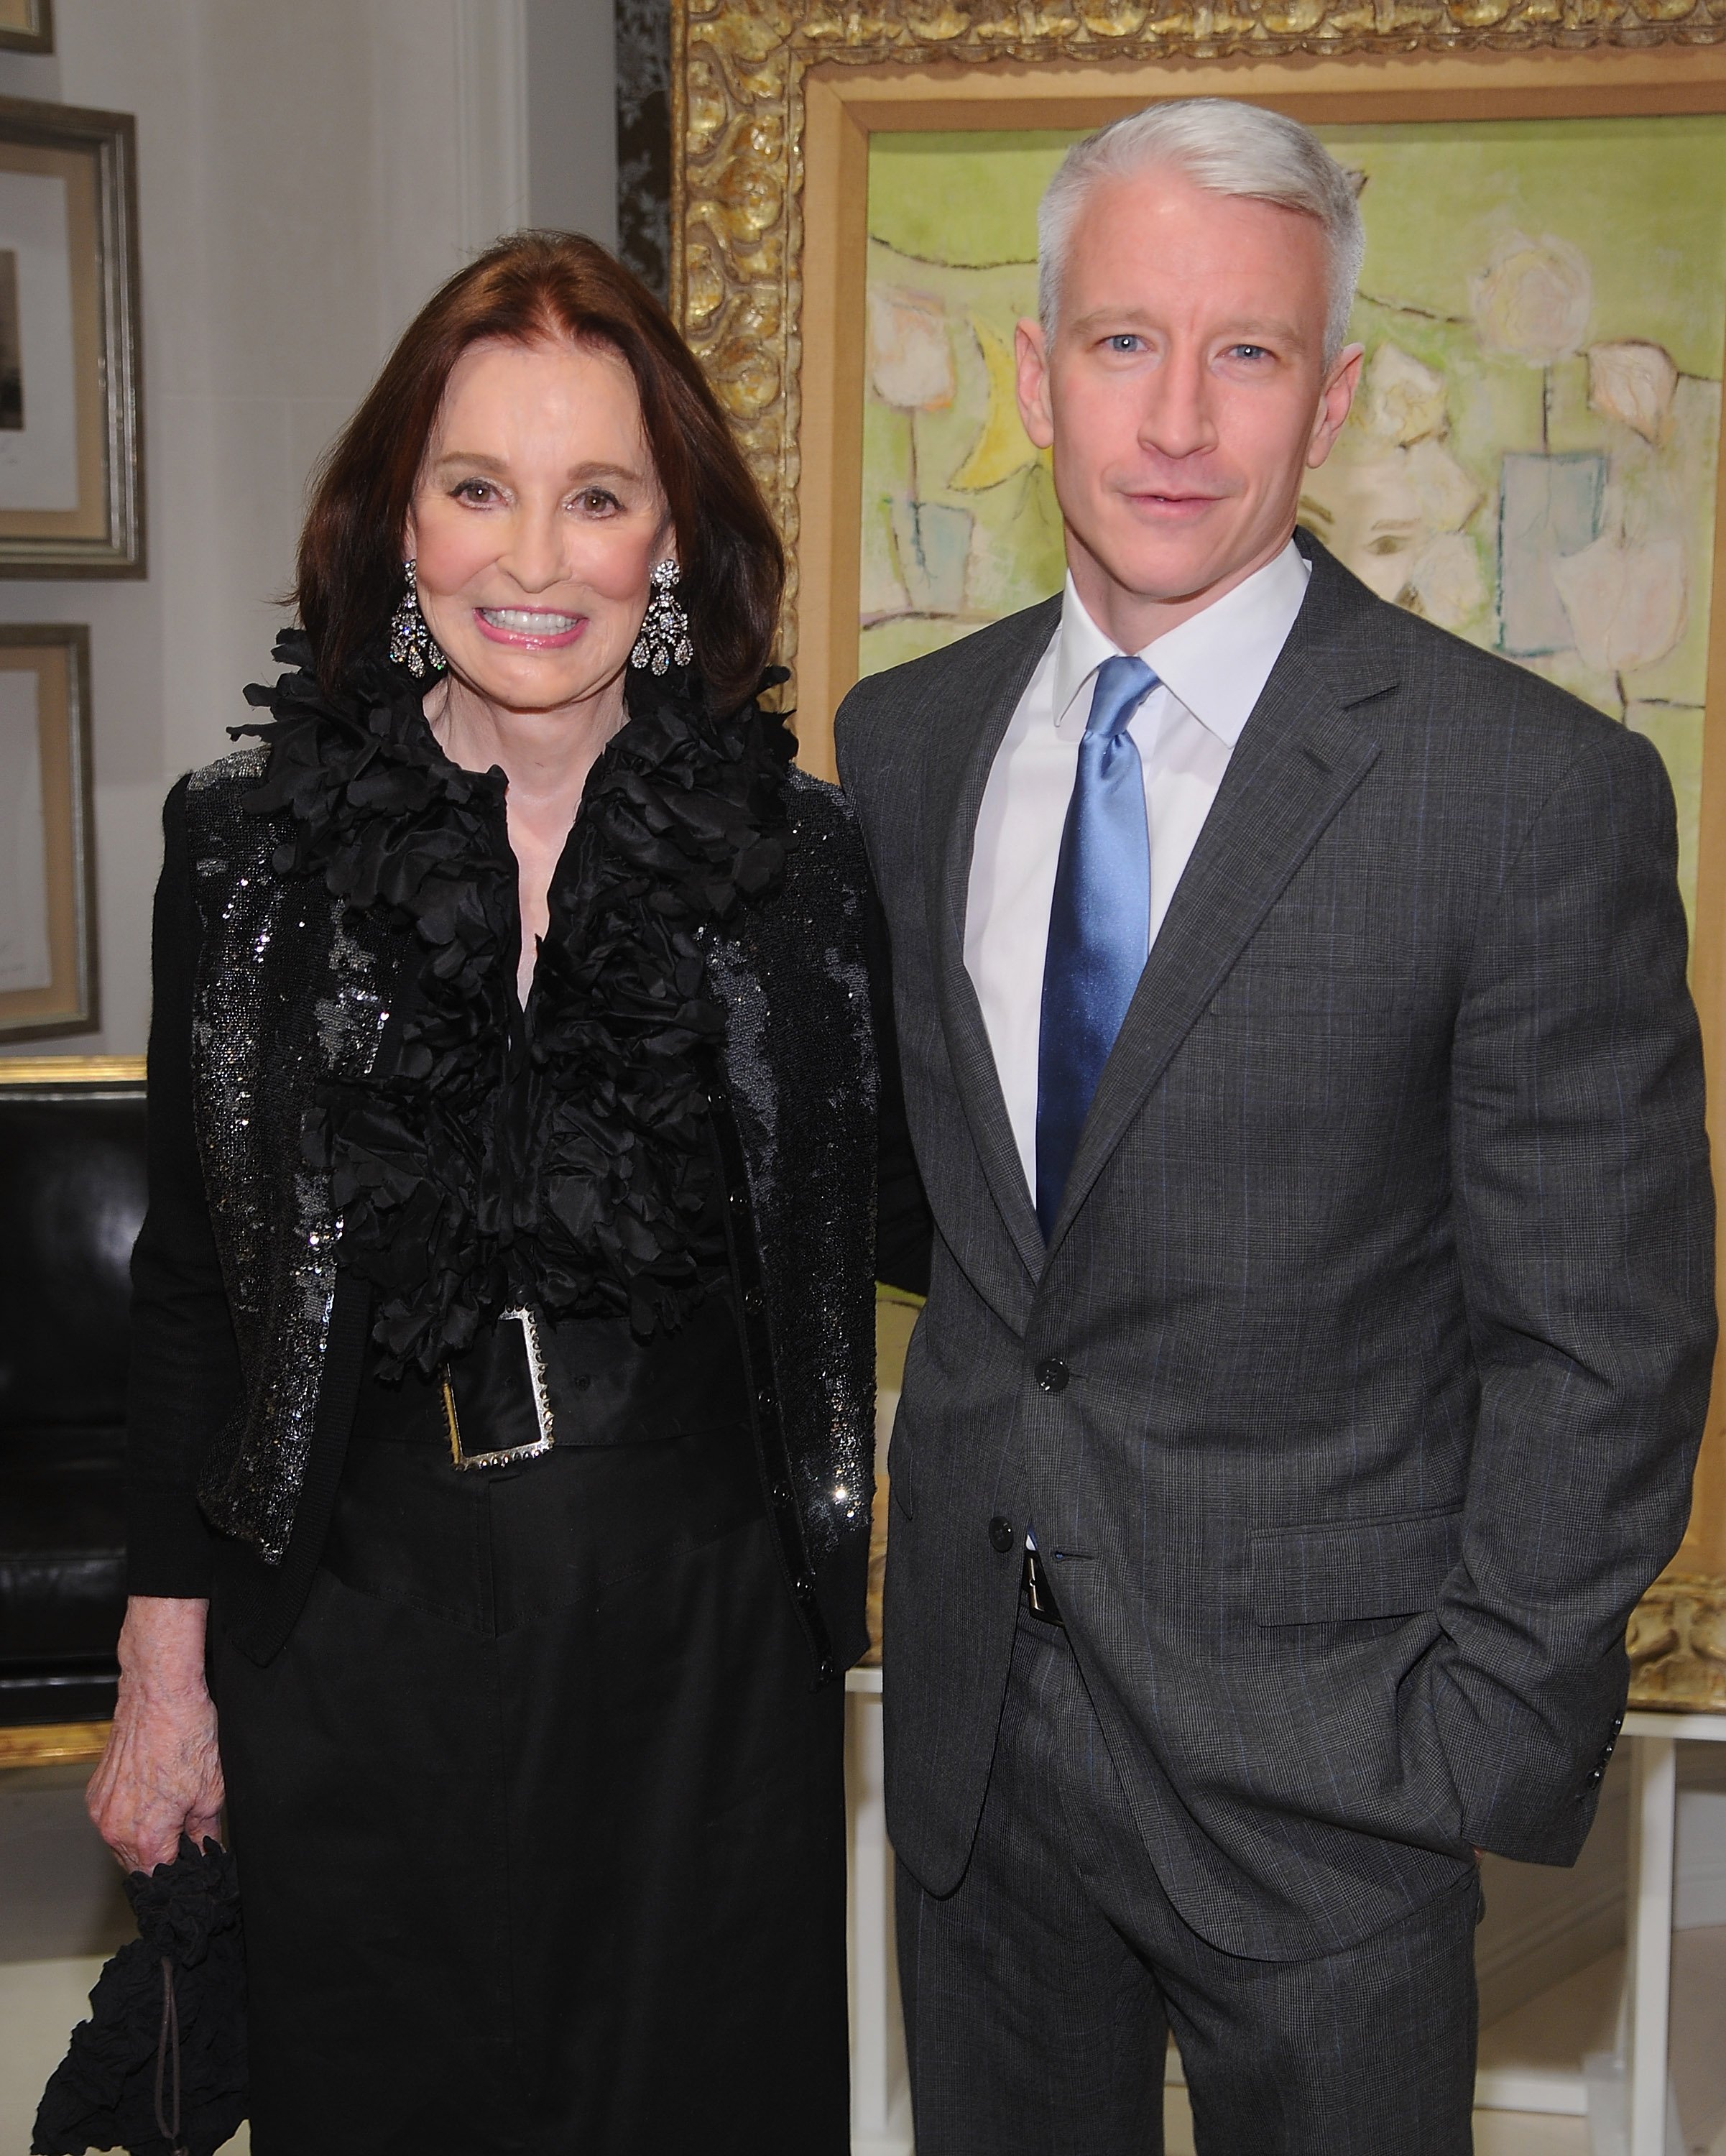 Gloria Vanderbilt and Anderson Cooper attend the launch party for "The World Of Gloria Vanderbilt" at the Ralph Lauren Women's Boutique on November 4, 2010 in New York City | Photo: Getty Images